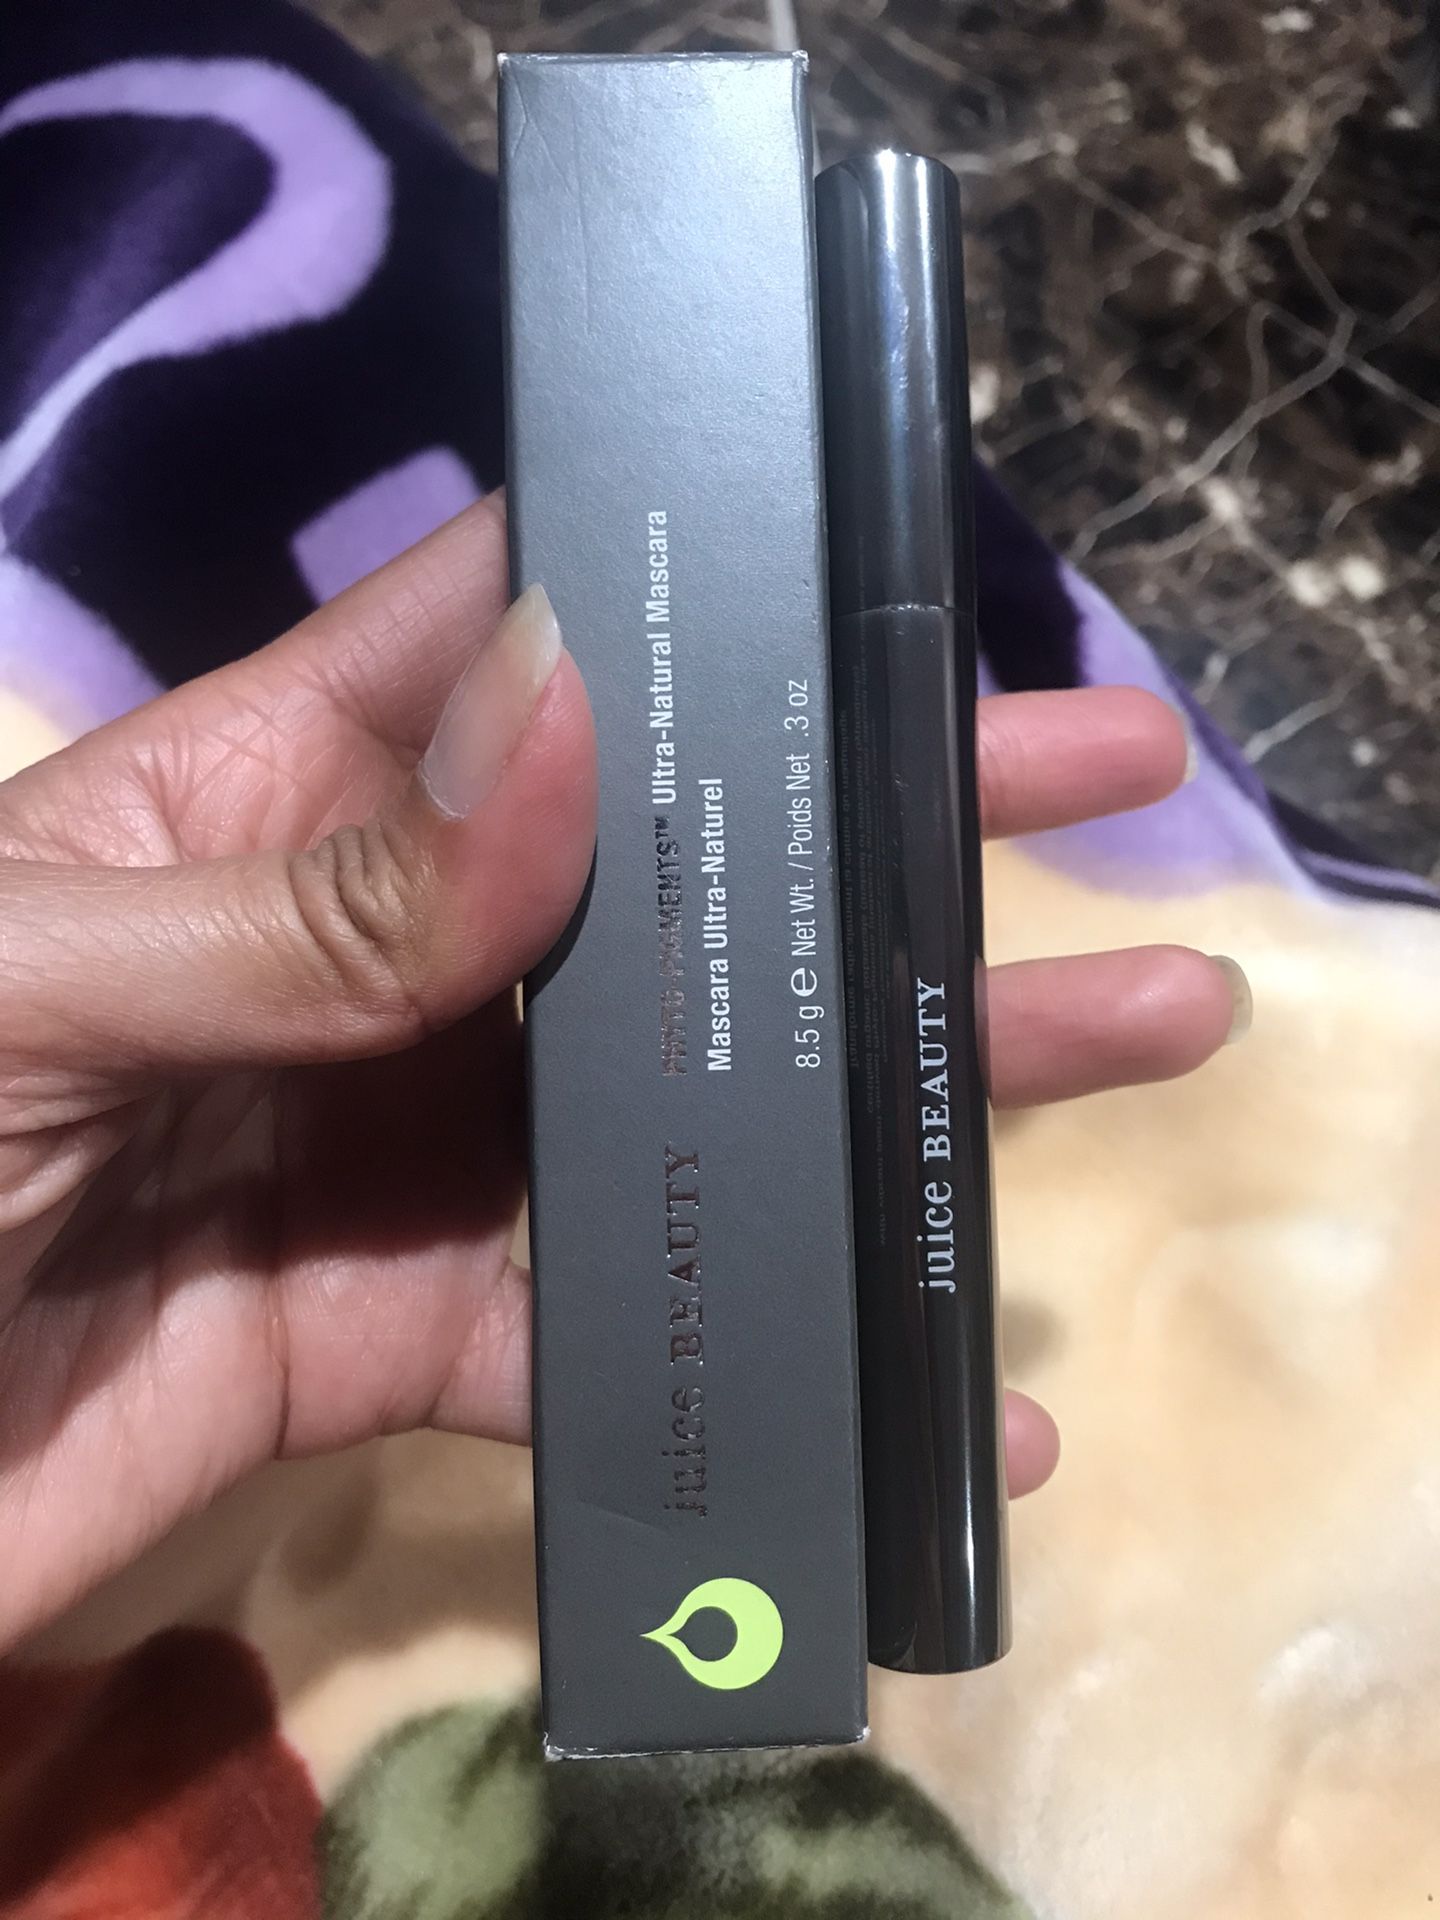 Juice beauty ultra natural mascara (authentic)